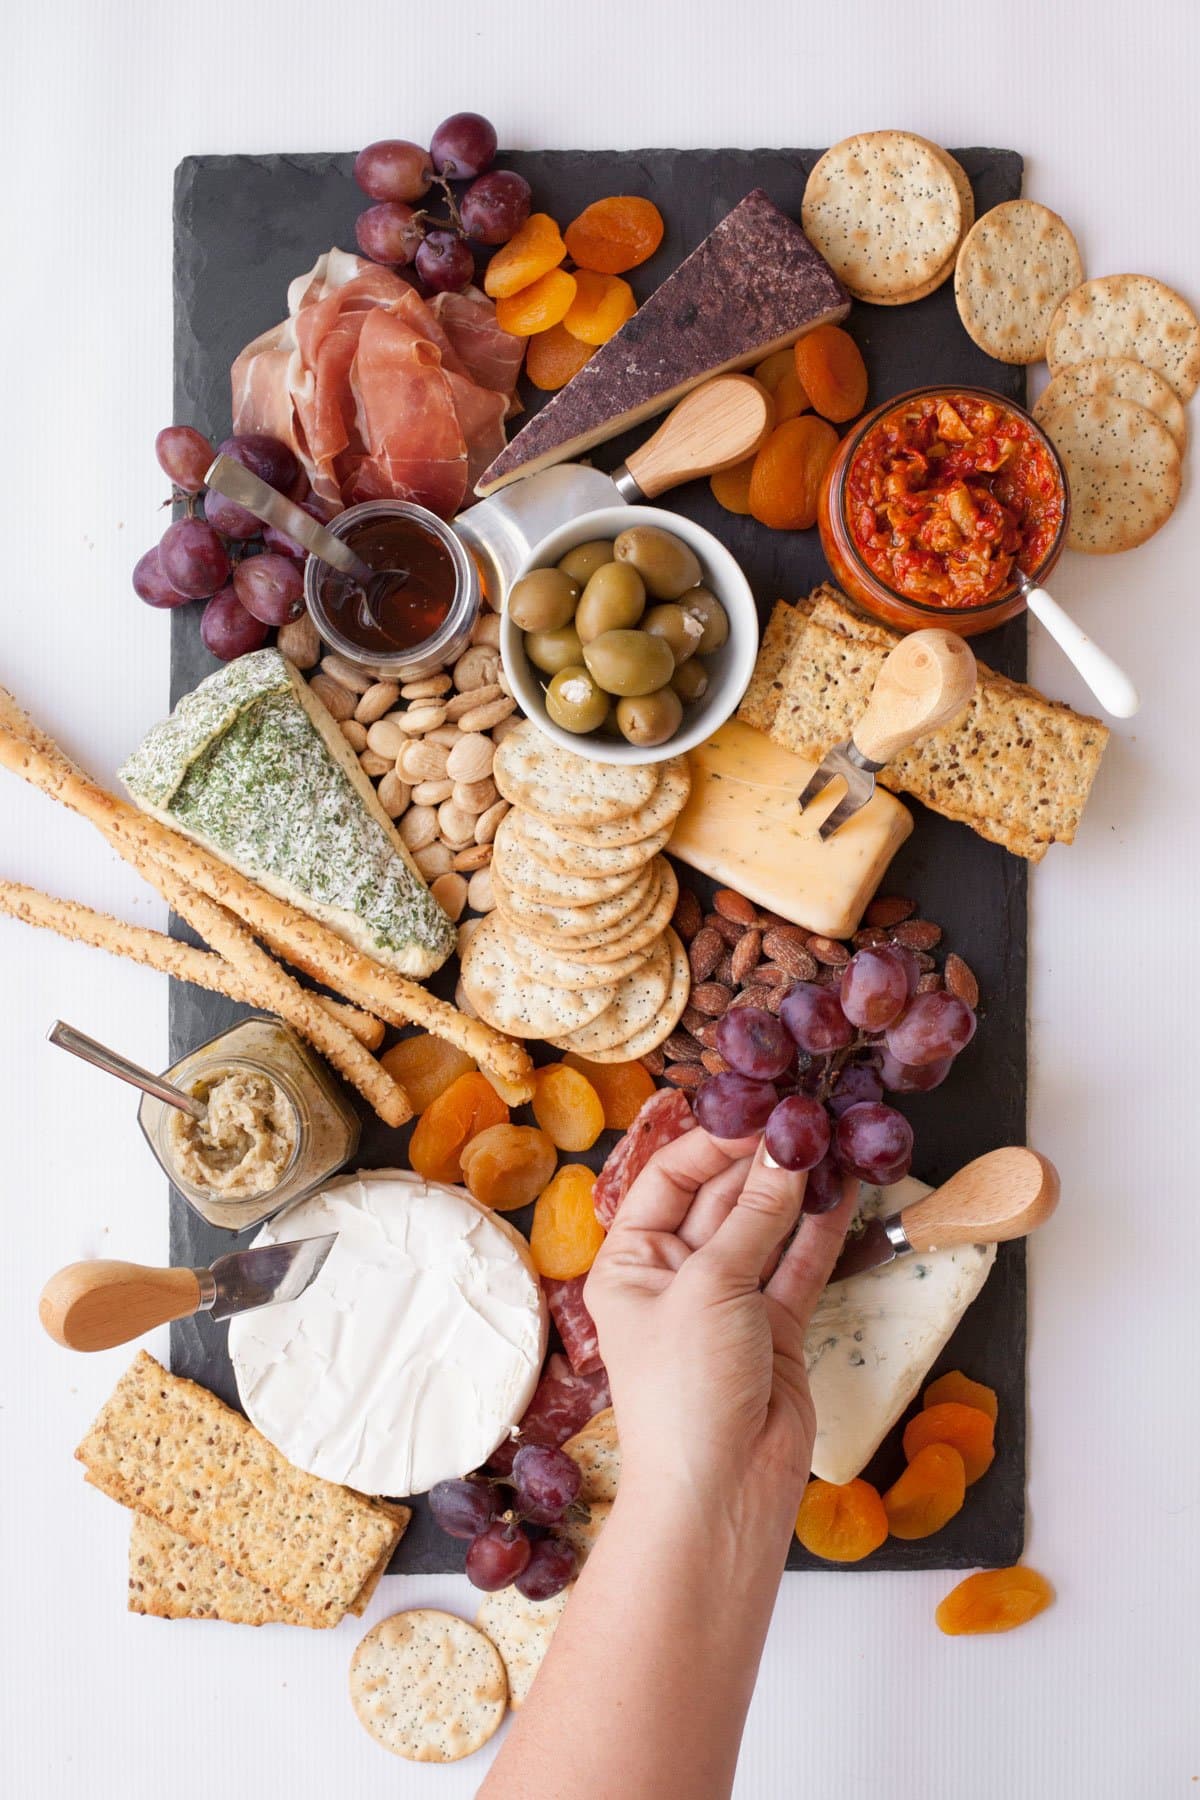 Slate cutting board with 5 wedges of cheese, each with a cheese knife. Various crackers, nuts, dried apricots, olives, condiments, and charcuterie are around the cheese. A hand places bunches of grapes on the board.